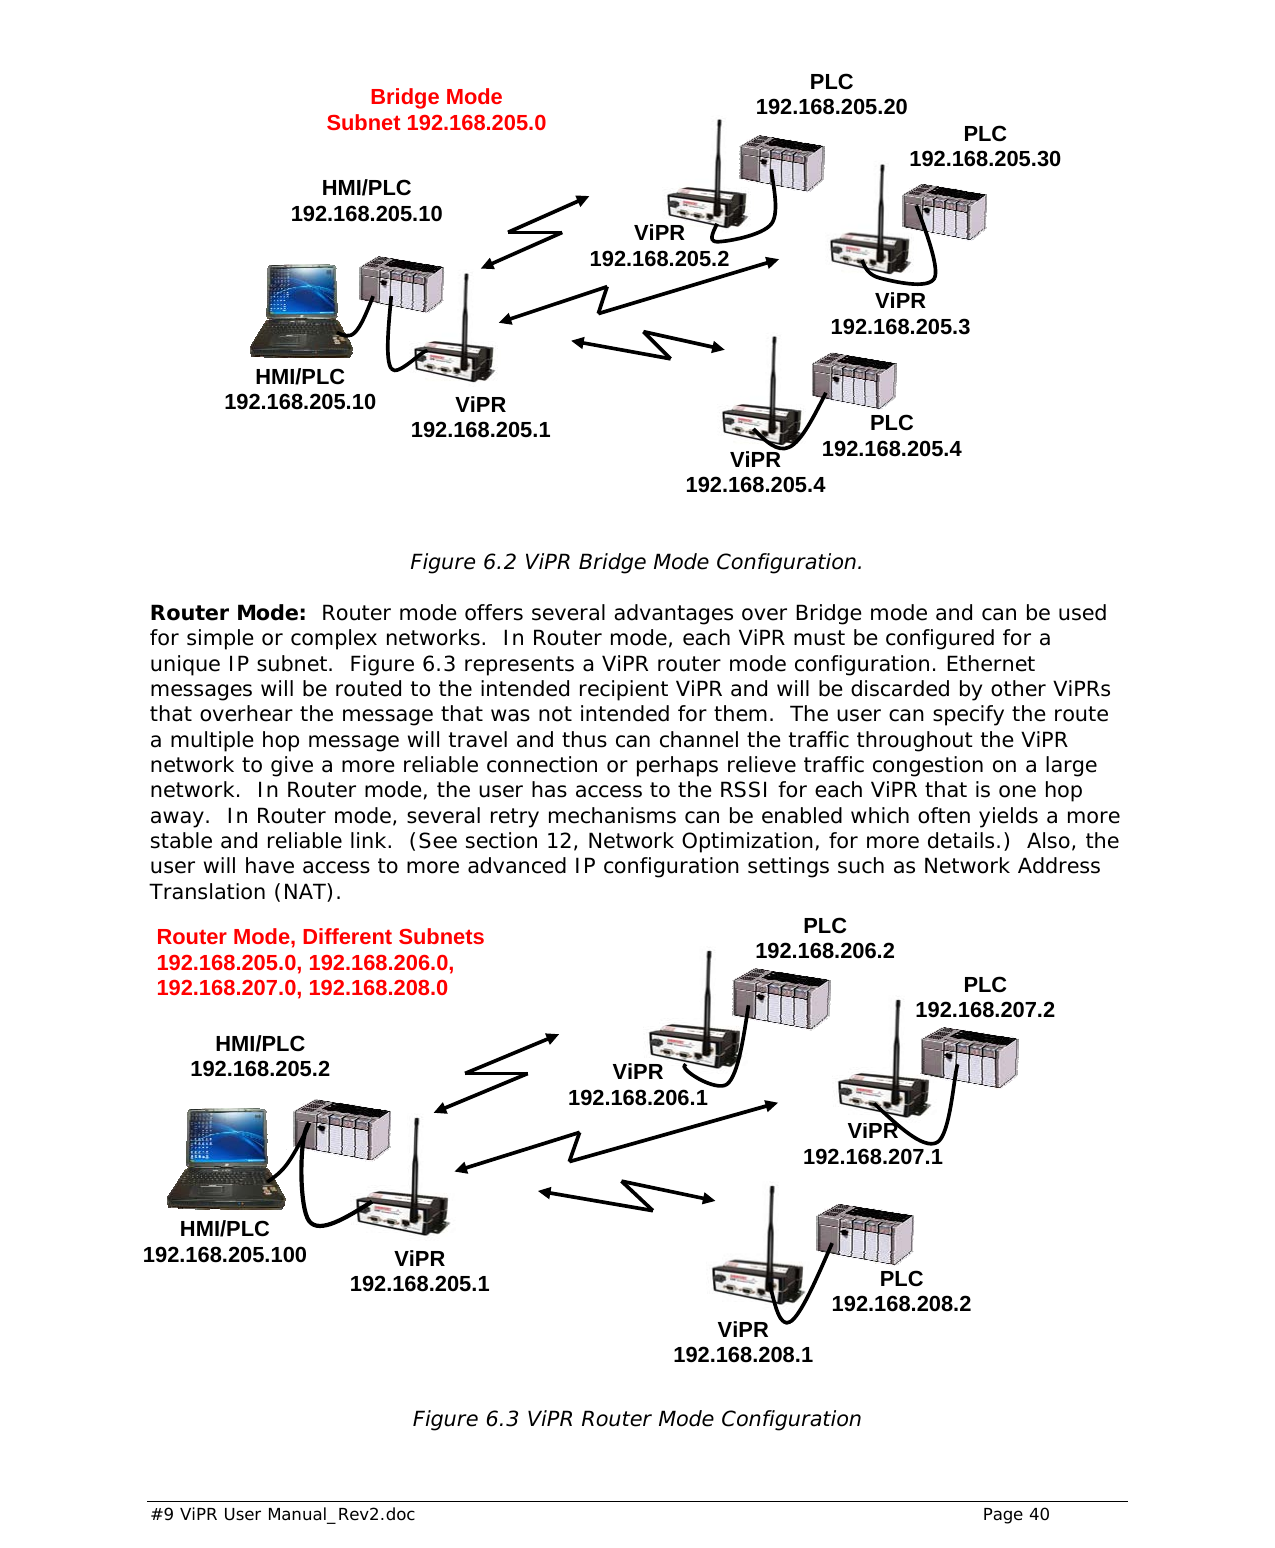  #9 ViPR User Manual_Rev2.doc    Page 40   Figure 6.2 ViPR Bridge Mode Configuration.  Router Mode:  Router mode offers several advantages over Bridge mode and can be used for simple or complex networks.  In Router mode, each ViPR must be configured for a unique IP subnet.  Figure 6.3 represents a ViPR router mode configuration. Ethernet messages will be routed to the intended recipient ViPR and will be discarded by other ViPRs that overhear the message that was not intended for them.  The user can specify the route a multiple hop message will travel and thus can channel the traffic throughout the ViPR network to give a more reliable connection or perhaps relieve traffic congestion on a large network.  In Router mode, the user has access to the RSSI for each ViPR that is one hop away.  In Router mode, several retry mechanisms can be enabled which often yields a more stable and reliable link.  (See section 12, Network Optimization, for more details.)  Also, the user will have access to more advanced IP configuration settings such as Network Address Translation (NAT).  Figure 6.3 ViPR Router Mode ConfigurationViPR 192.168.205.1 ViPR 192.168.205.3 PLC 192.168.205.4HMI/PLC 192.168.205.10 HMI/PLC 192.168.205.10PLC 192.168.205.30 PLC 192.168.205.20 ViPR 192.168.205.2 ViPR 192.168.205.4 Bridge Mode Subnet 192.168.205.0 ViPR 192.168.205.1 ViPR 192.168.207.1 ViPR 192.168.208.1 PLC 192.168.208.2 HMI/PLC 192.168.205.2 HMI/PLC 192.168.205.100 PLC 192.168.207.2PLC 192.168.206.2 ViPR 192.168.206.1 Router Mode, Different Subnets  192.168.205.0, 192.168.206.0, 192.168.207.0, 192.168.208.0 